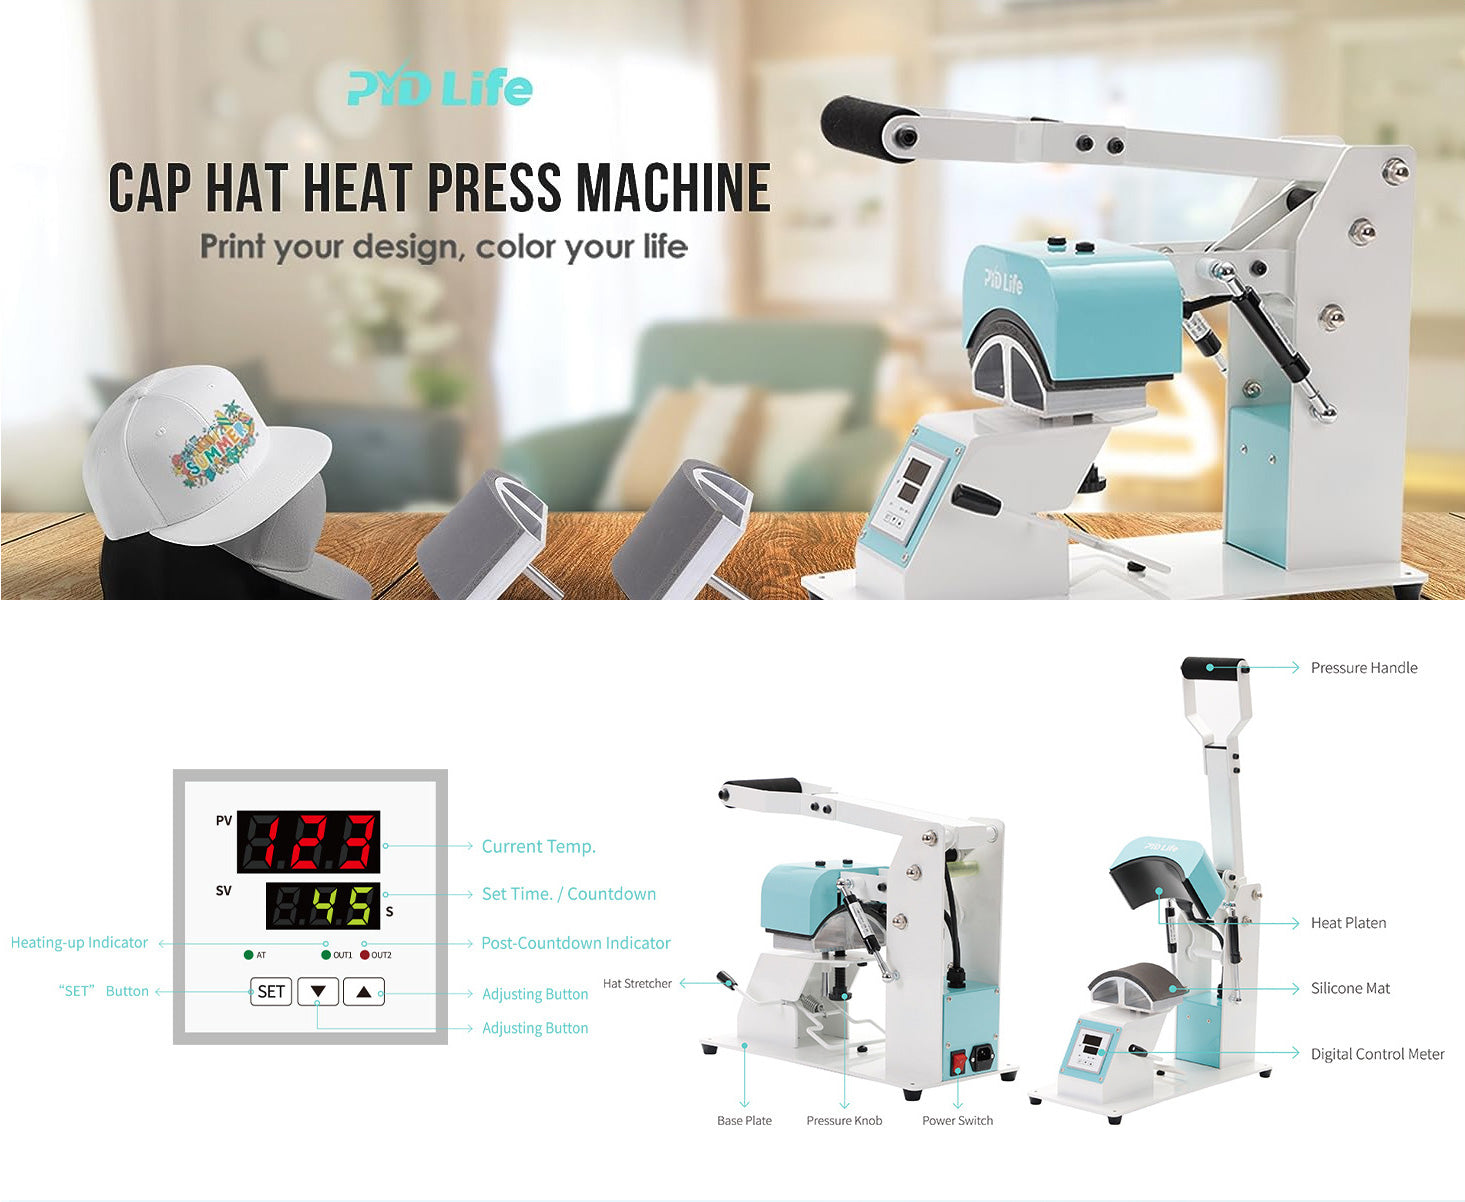  PYD Life Caps Hat Heat Press Machine Mint Green 6.5 x 3 for  Sublimation Printing and HTV DIY Projects,with 2 Pieces Silicone Mats(5.9  x 3.15,5.9 x 3.74) : Arts, Crafts 